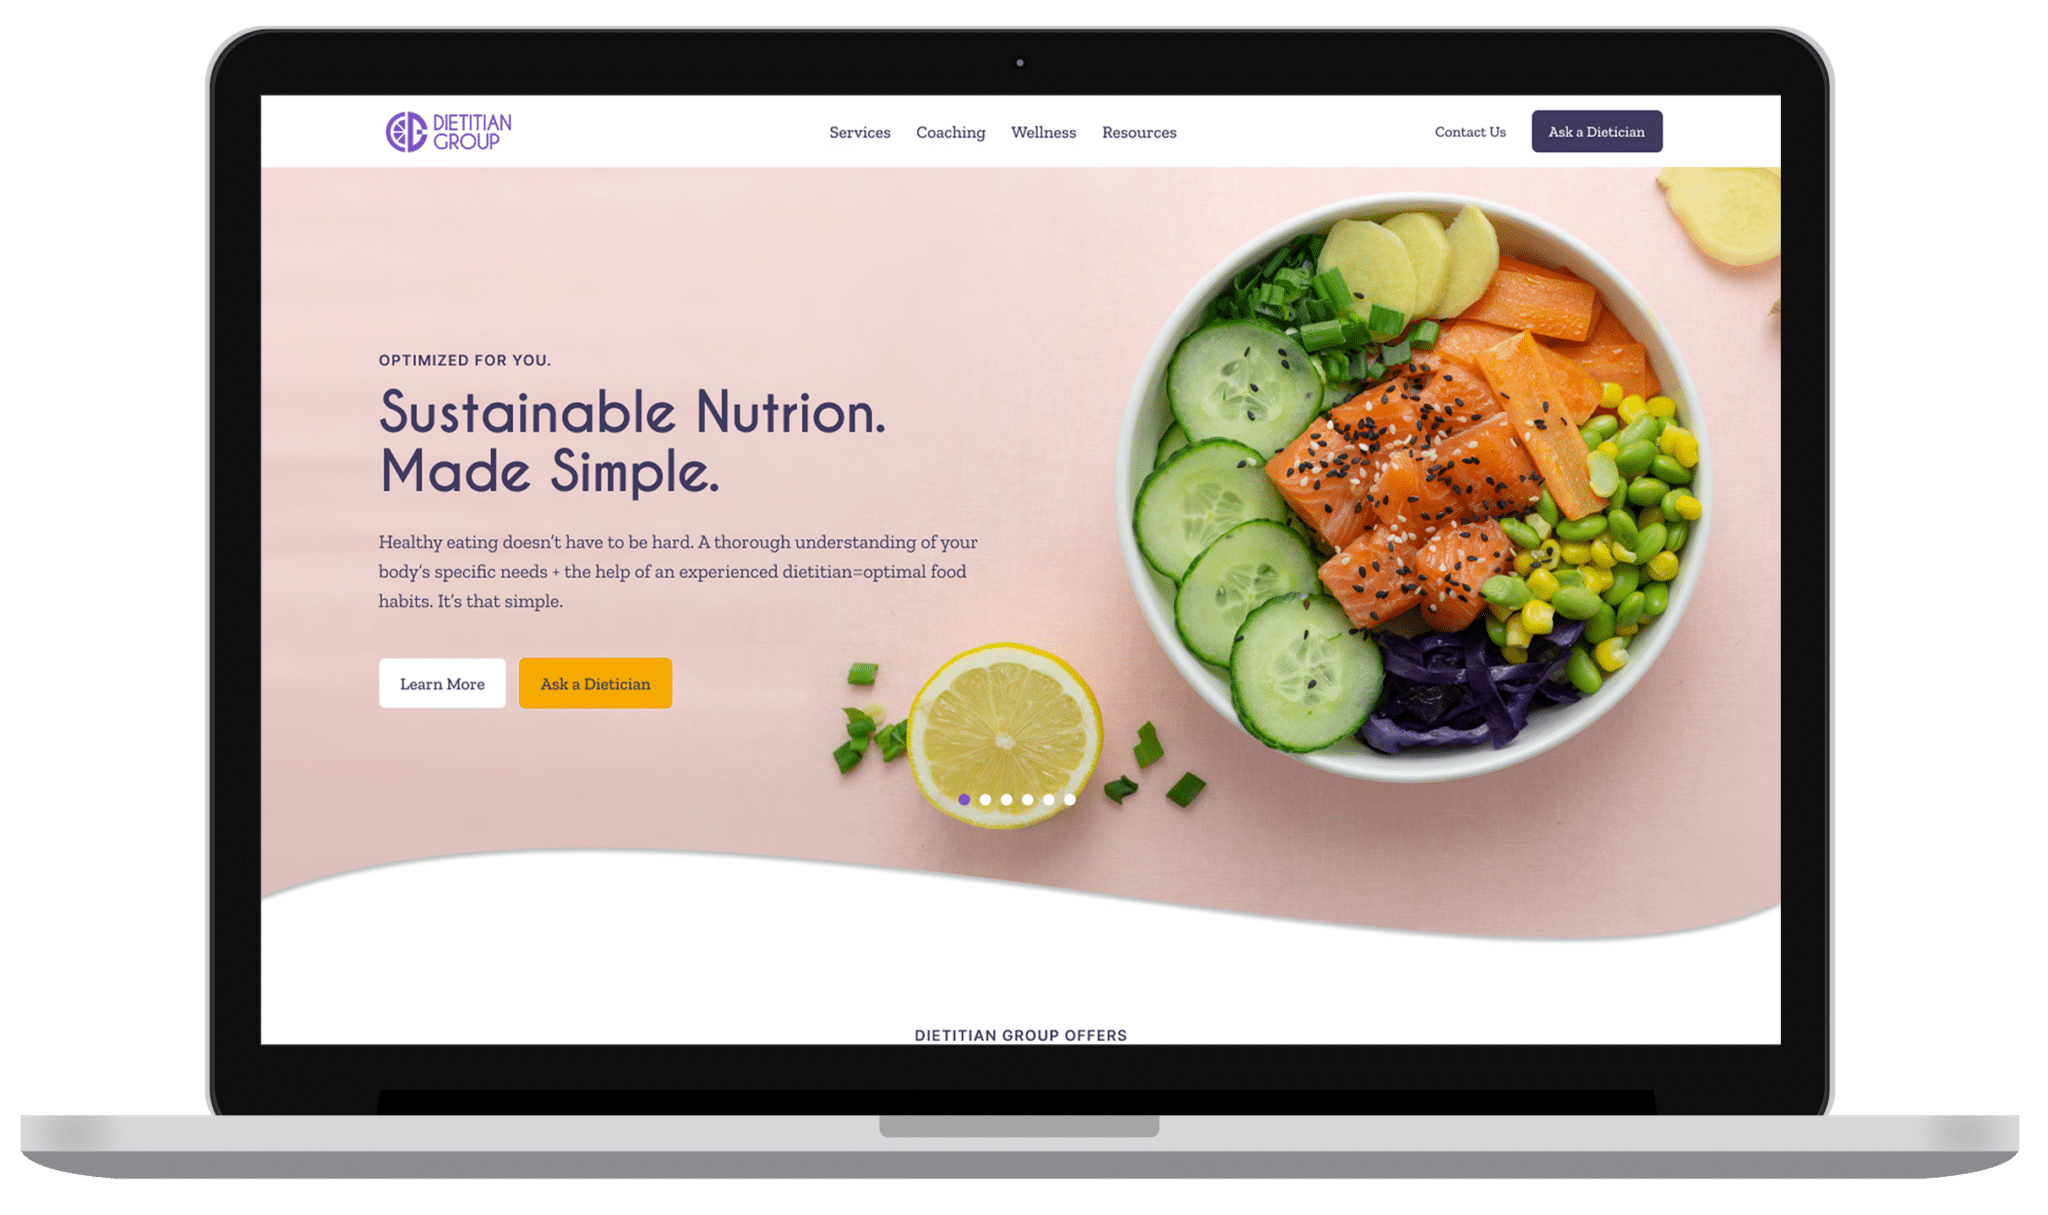 Homepage of the Dietitian Group website displayed on an open laptop.